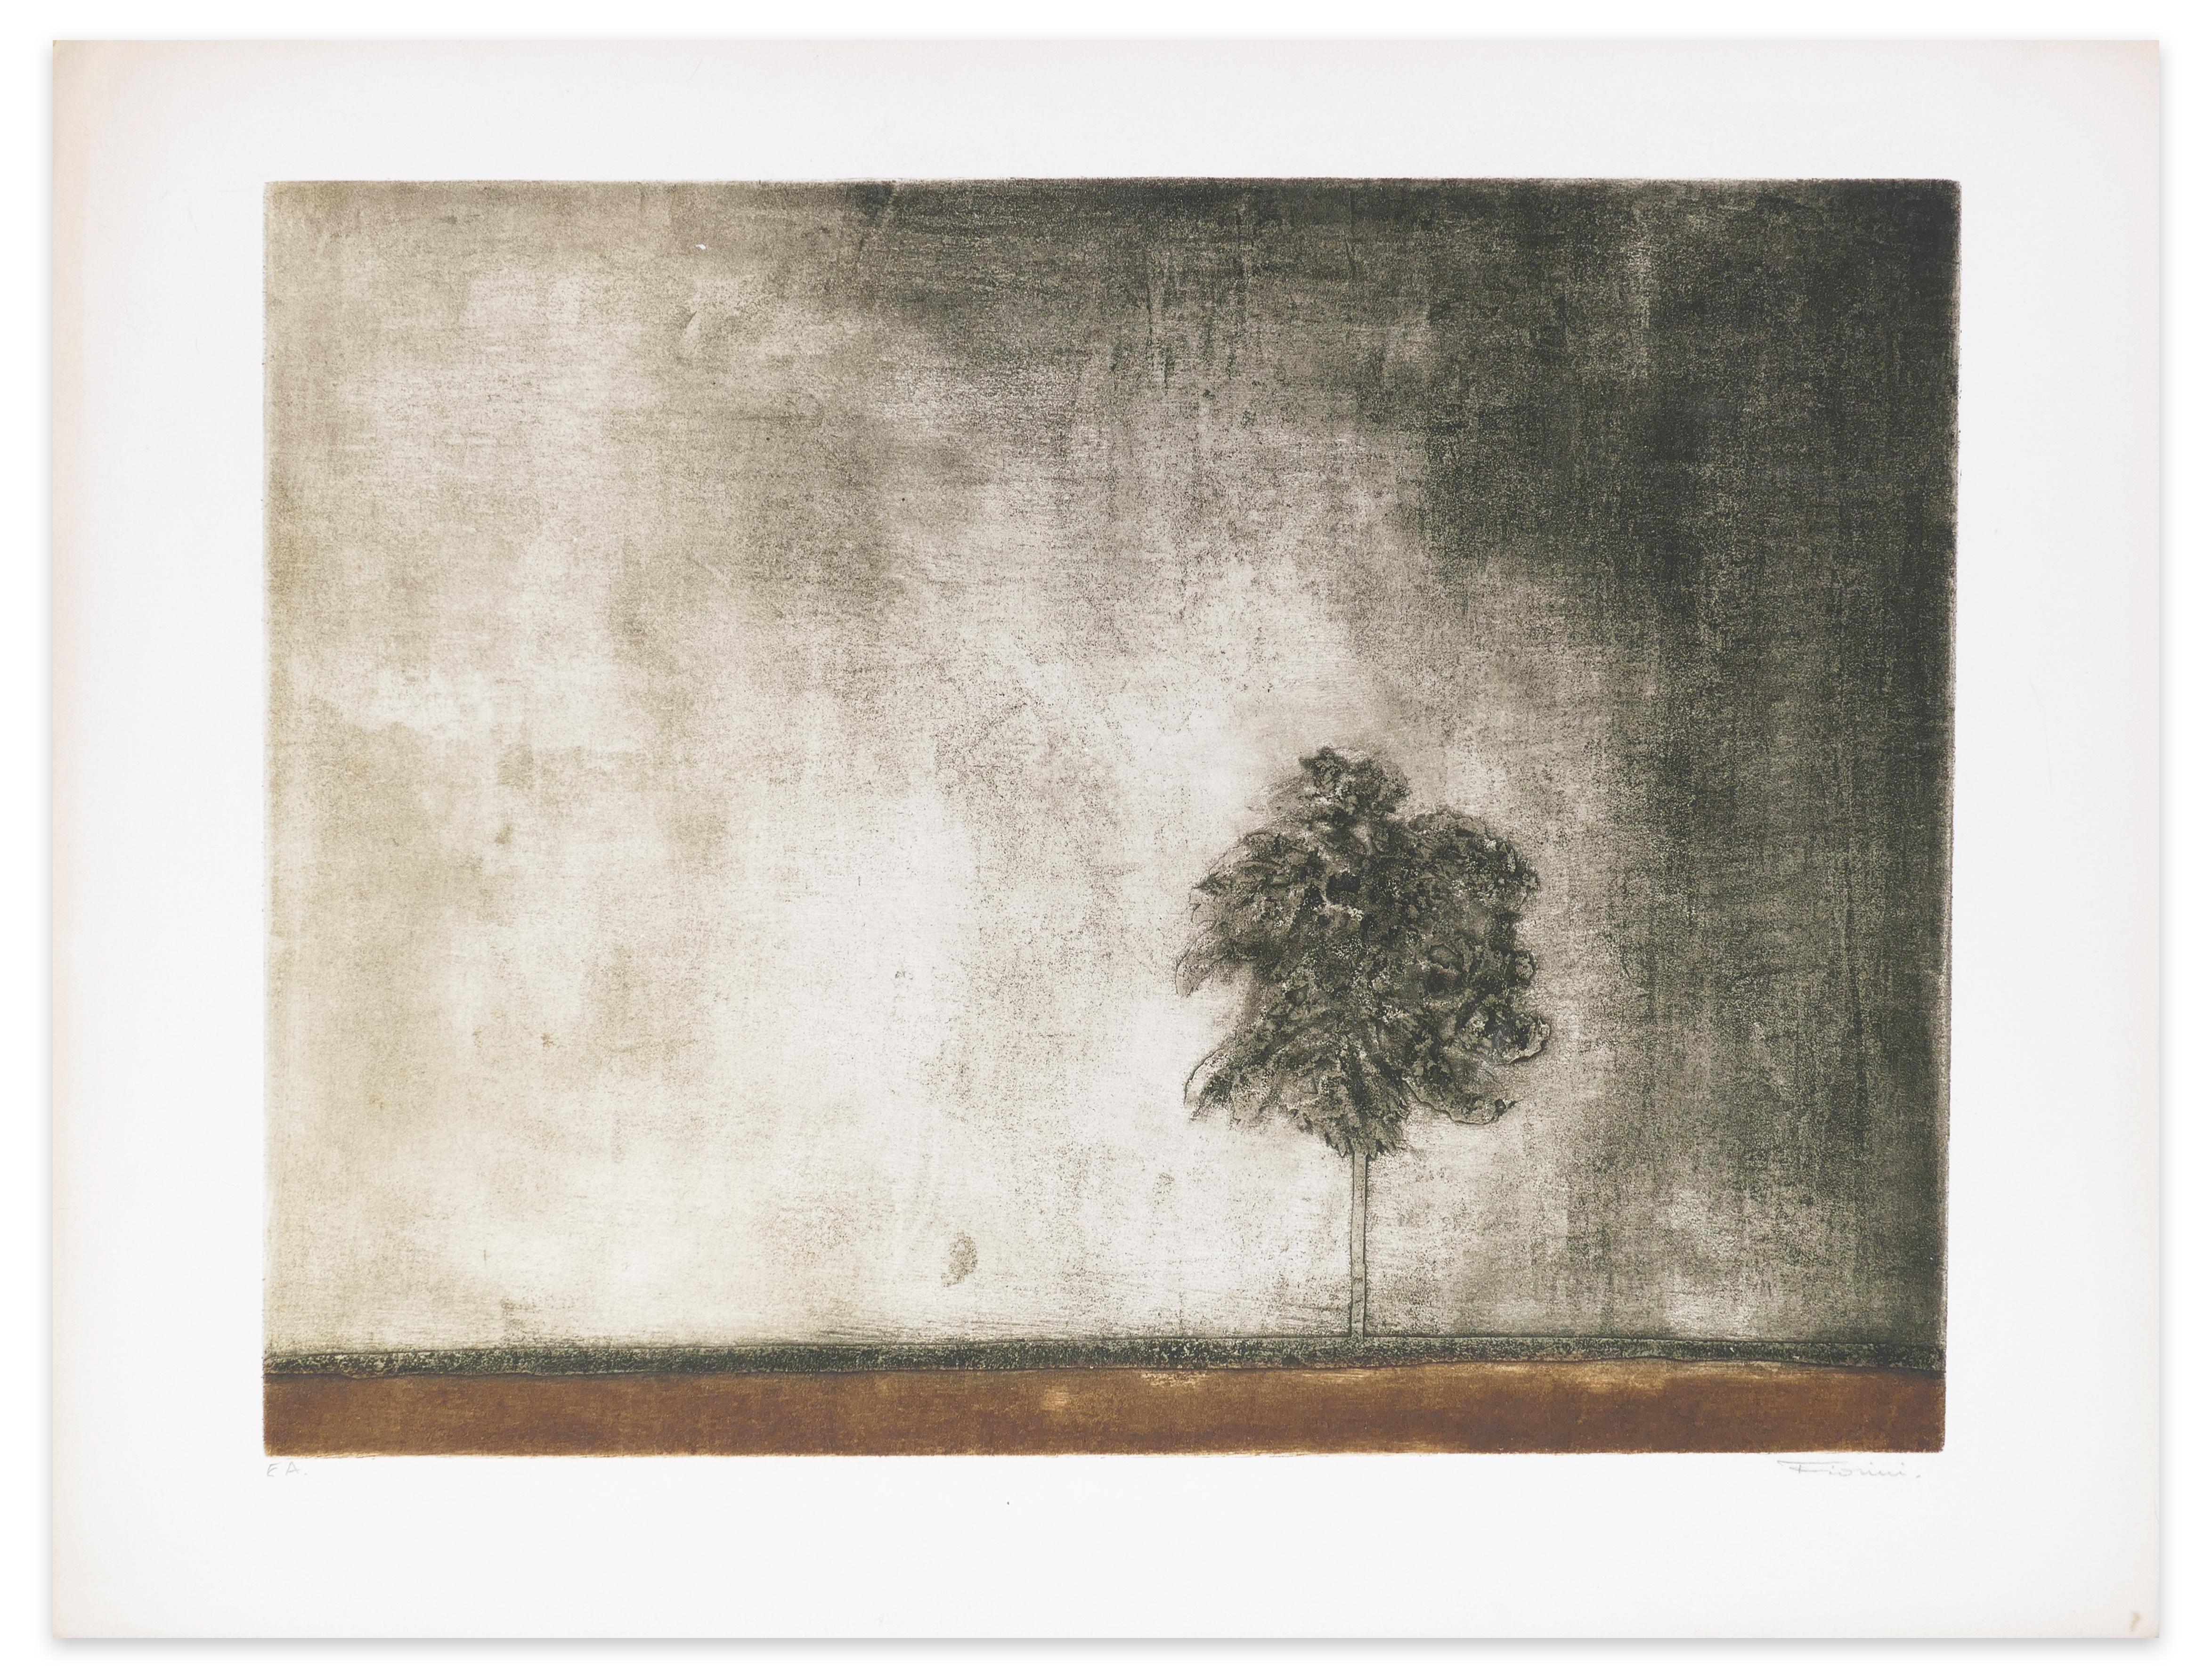 Un arbre is an original color etching and aquatint on paper, realized by the artist Marcel Fiorini (1922-2008).

This is an artist proof, signed in pencil on the lower right margin. 

Beautiful specimen, with bright colors and in excellent